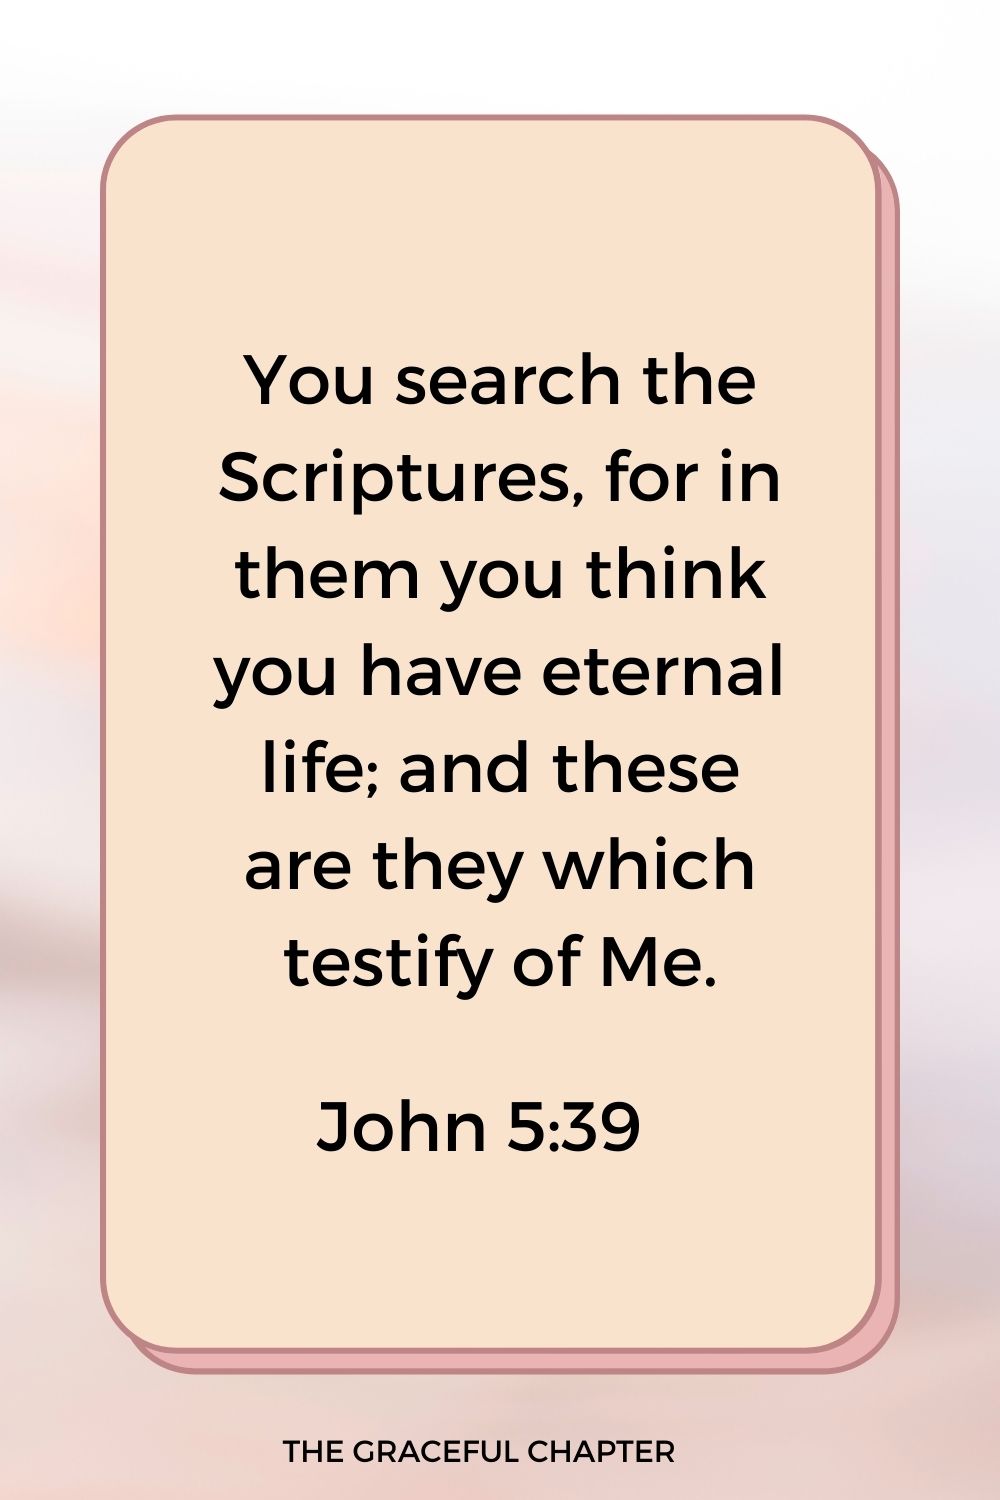 You search the Scriptures, for in them you think you have eternal life; and these are they which testify of Me. John 5:39